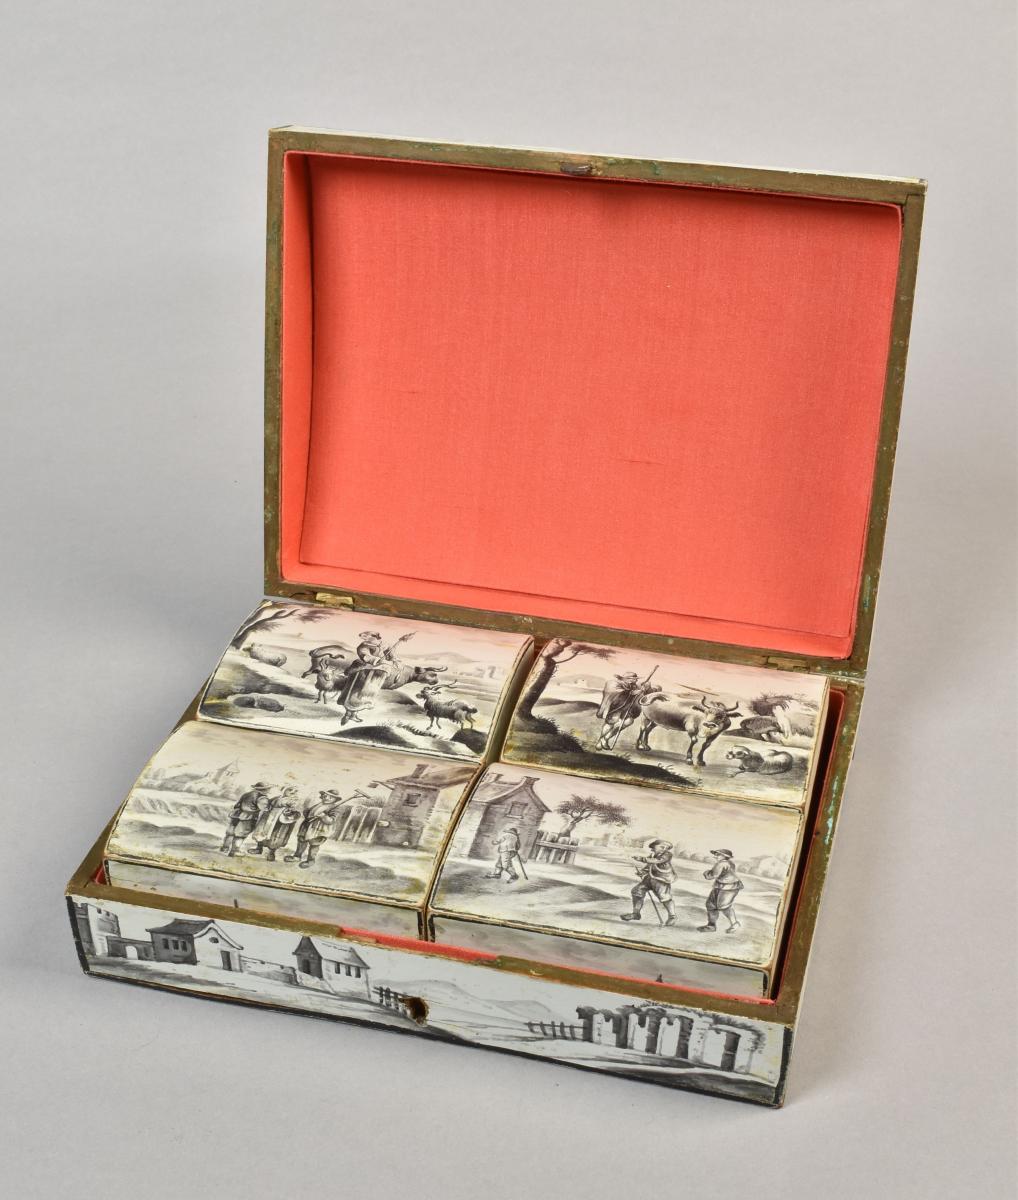 A fine Spa box containing a set of four smaller boxes, all decorated en grisaille, c.1780